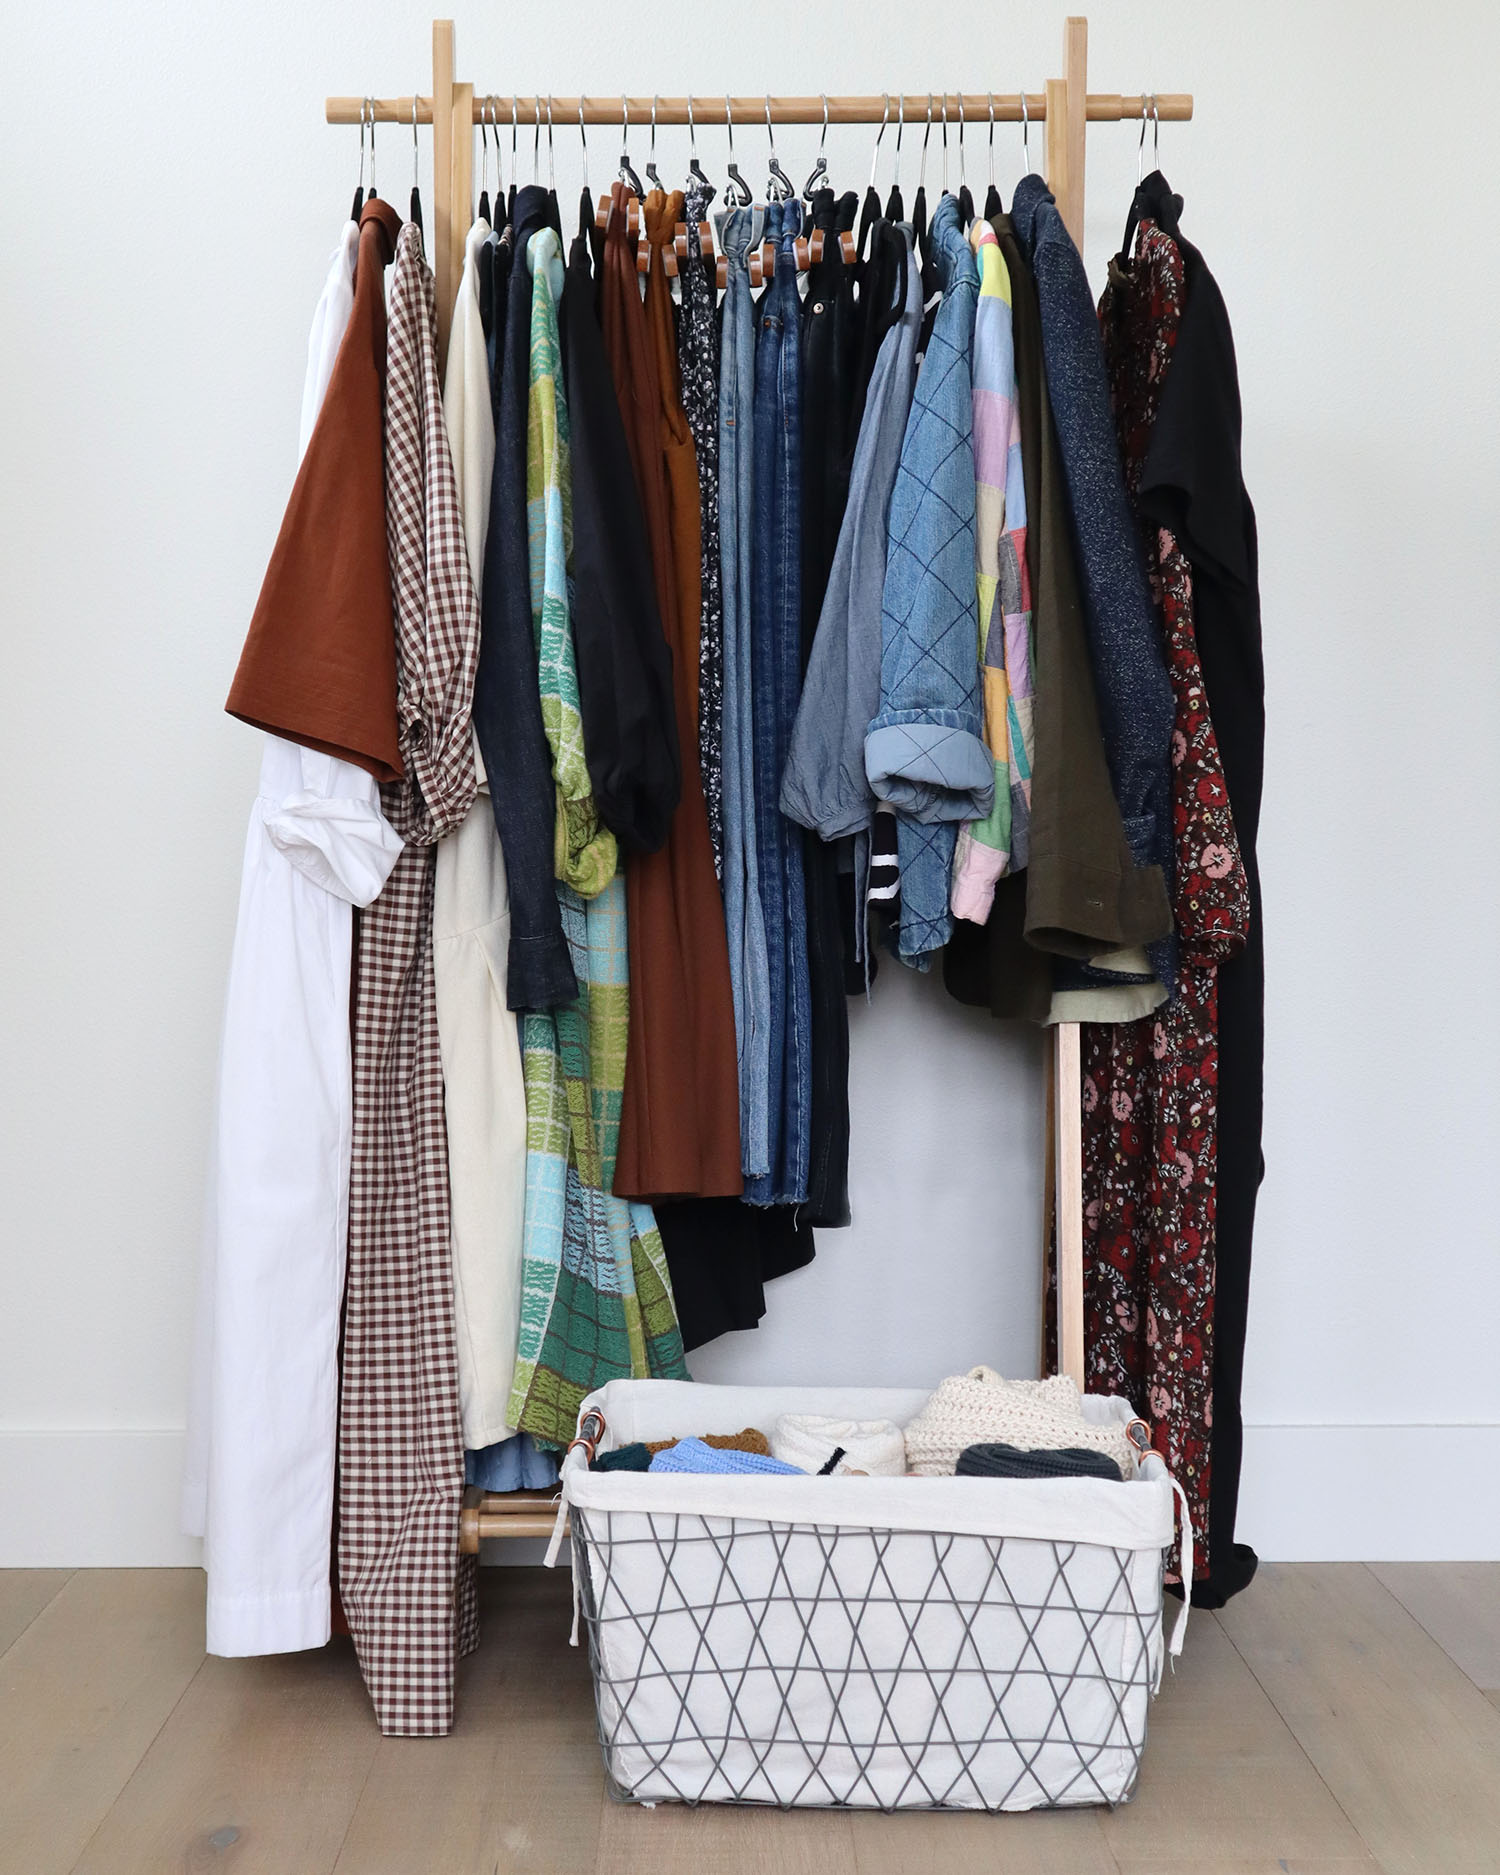 A wooden clothing rack holding 24 items of clothing is in front of a light wall. There is a wire basket in front of it, off to the right, which holds 6 sweaters.